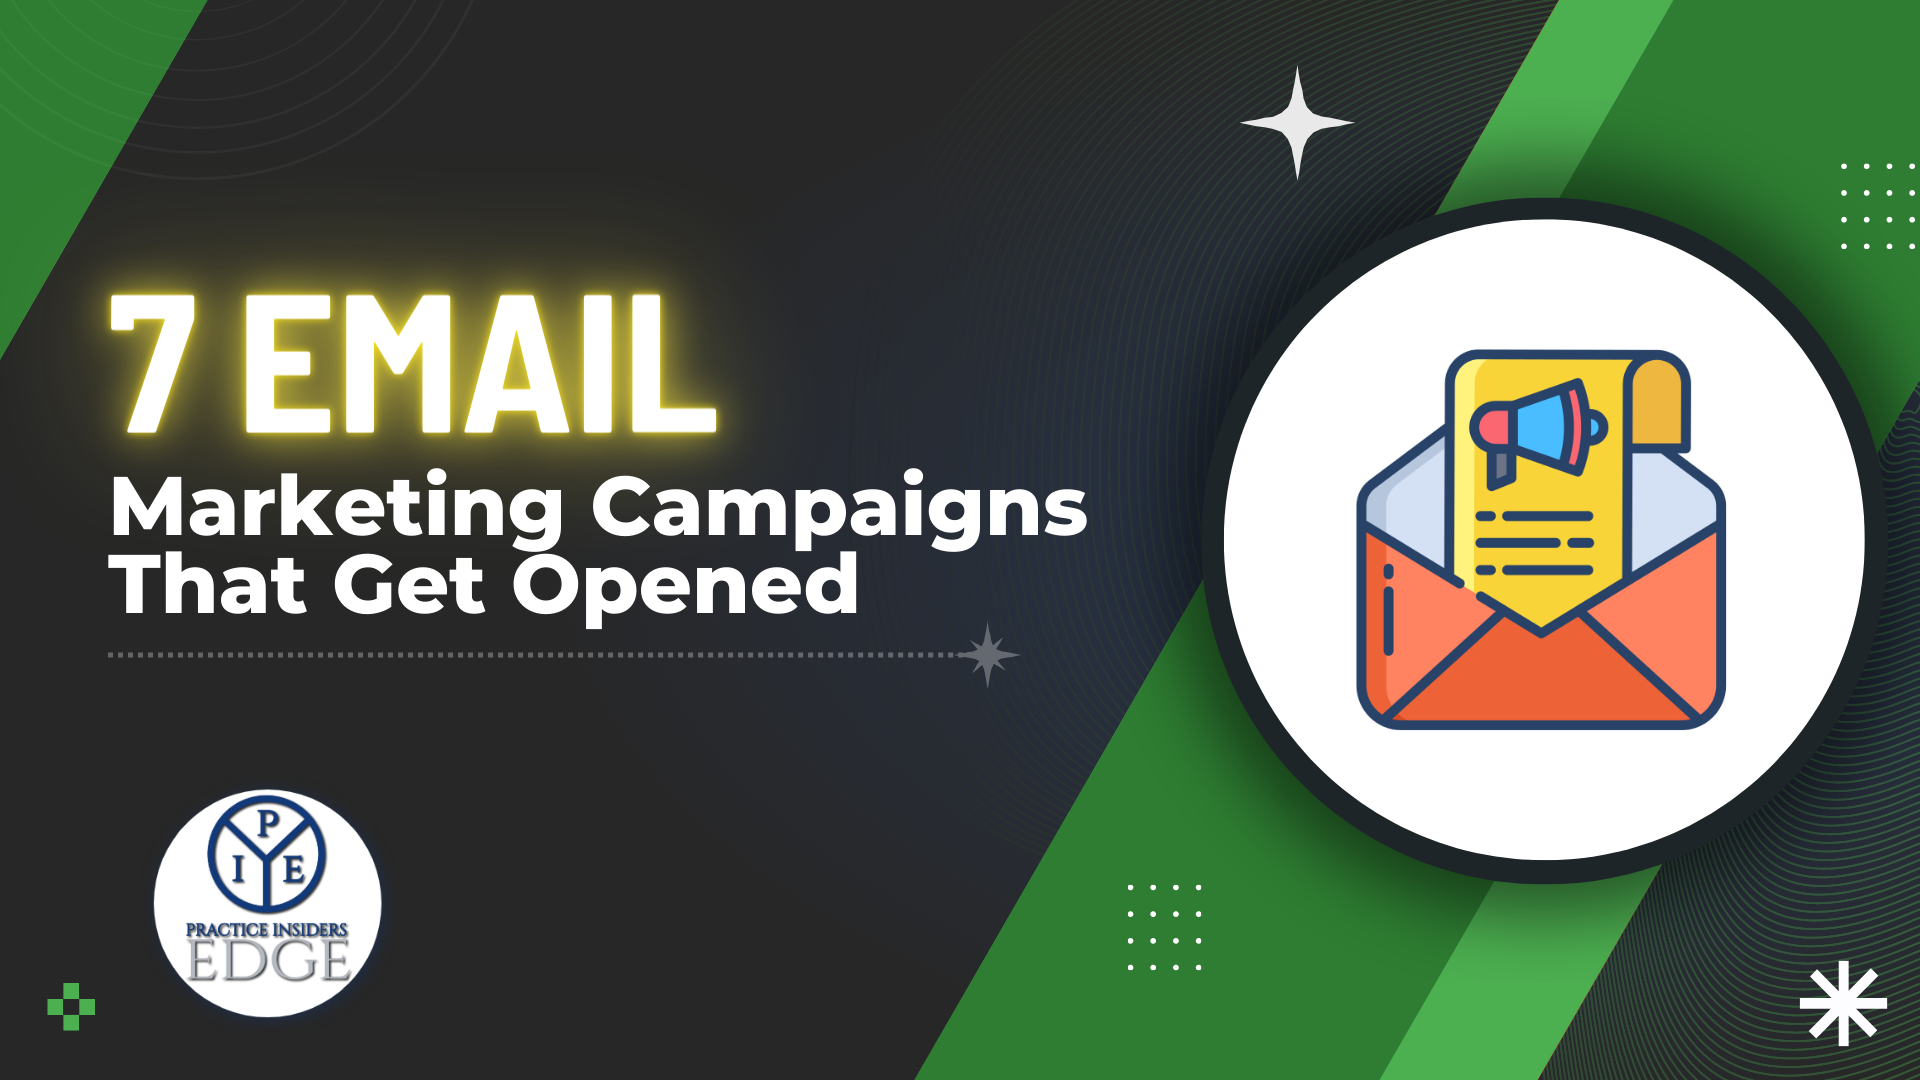 7 Email Marketing Campaigns That Get Opened